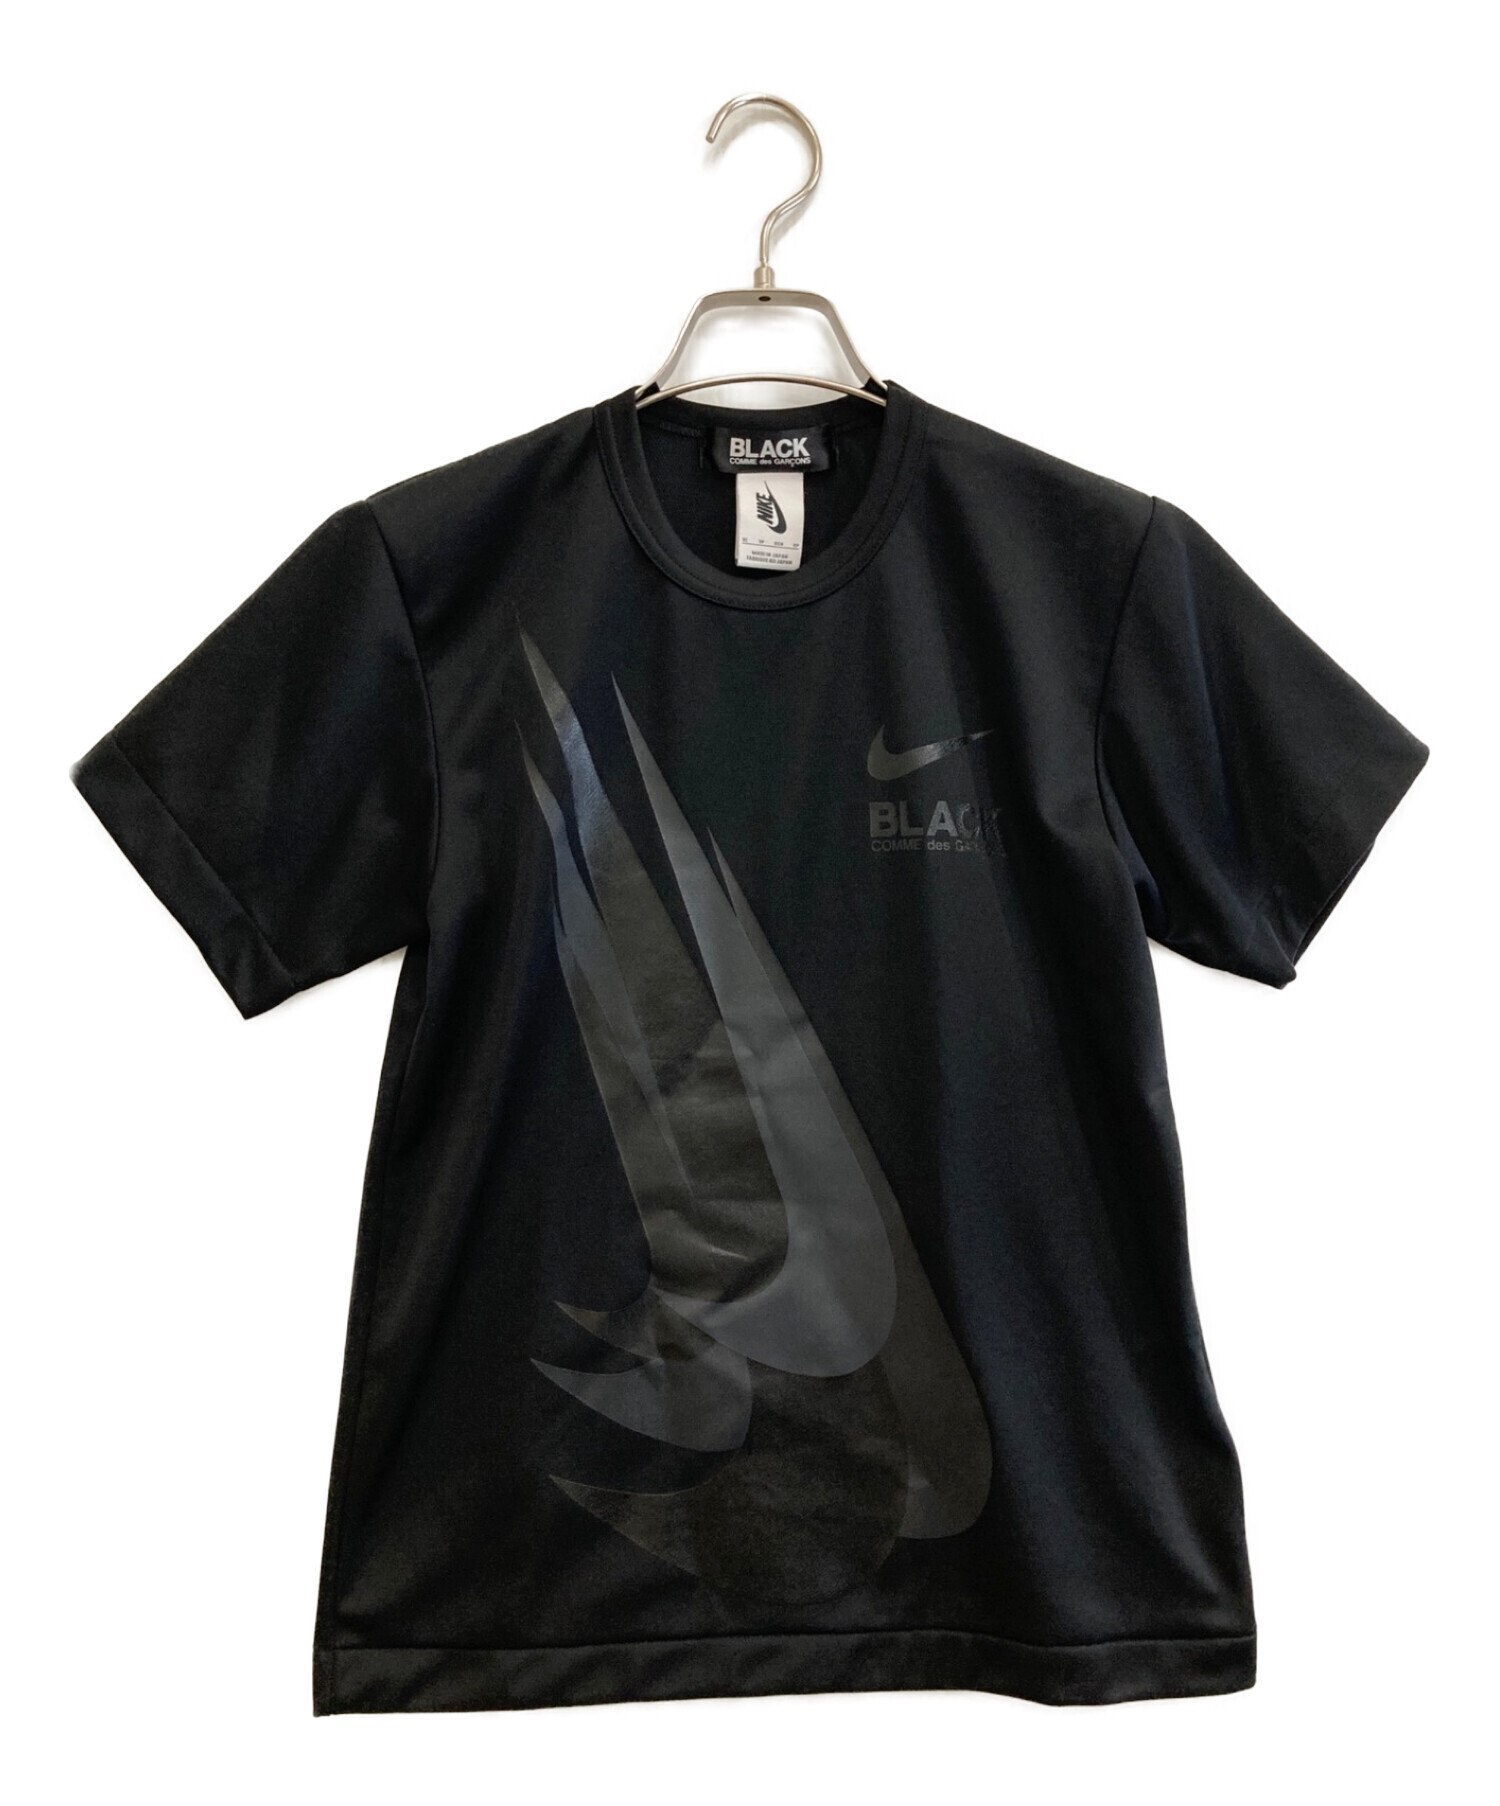 BLACK COMME des GARCONS x NIKE コラボ TEE - Tシャツ/カットソー 